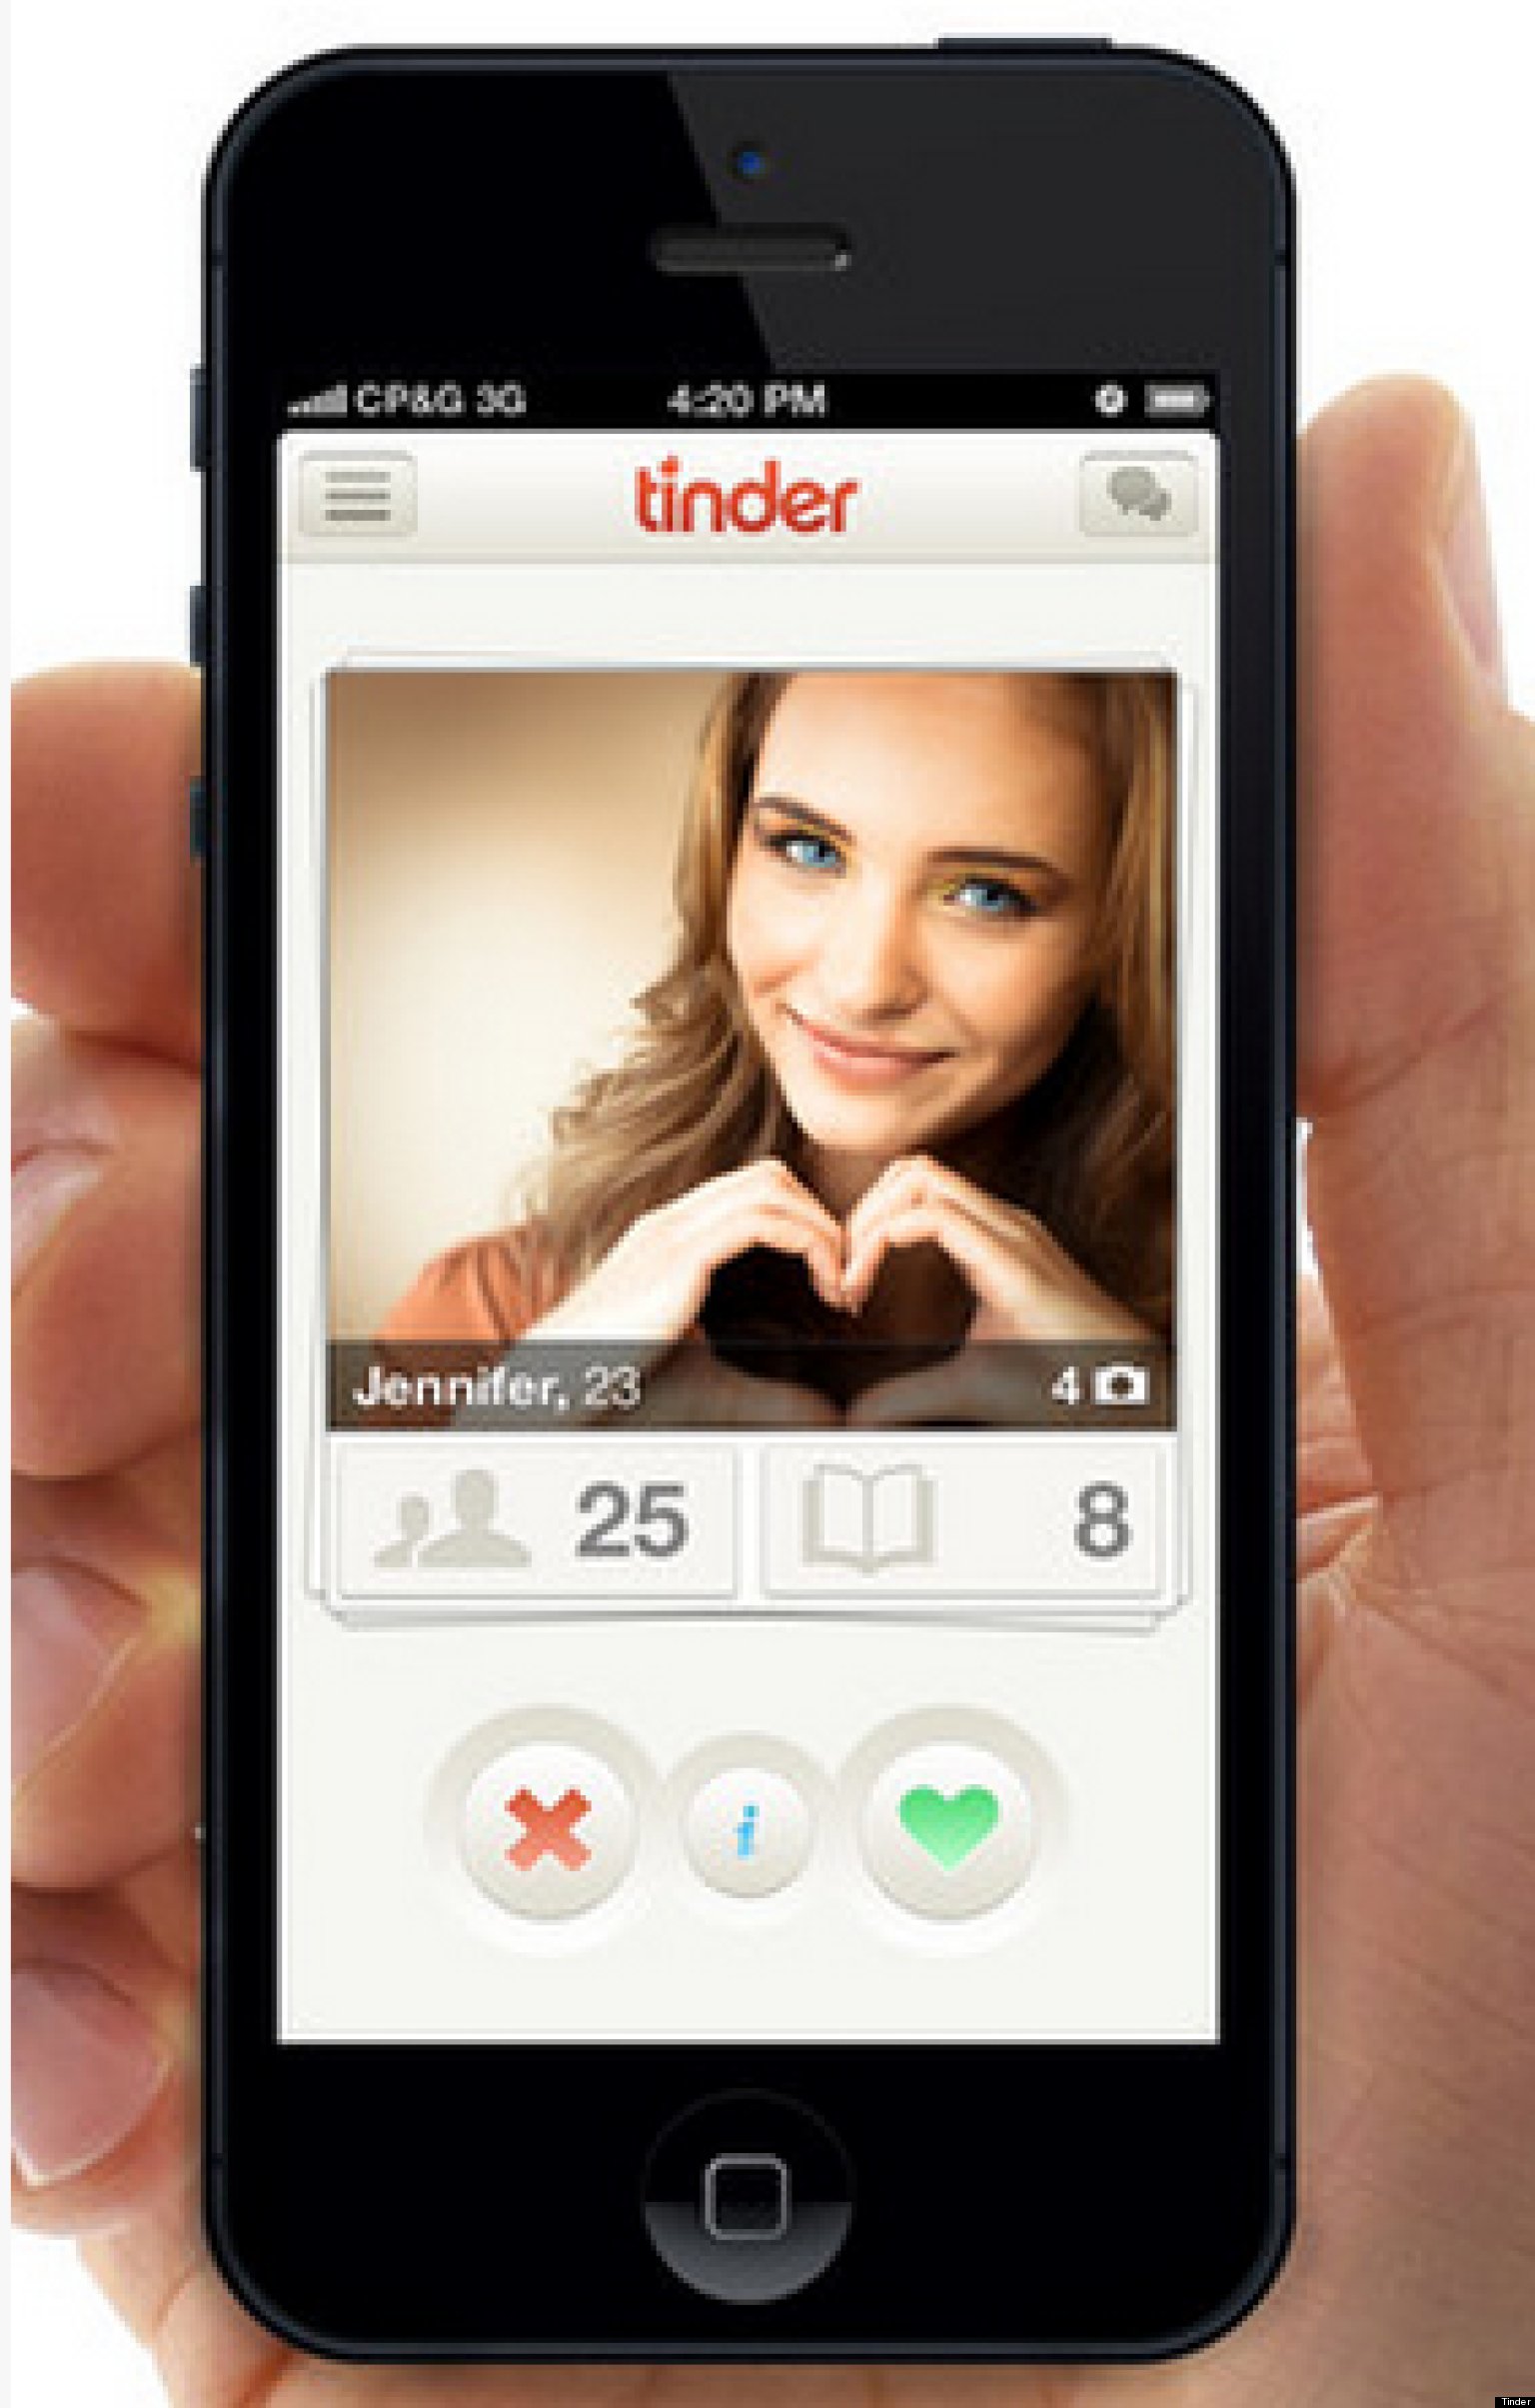 What is tinder dating site about